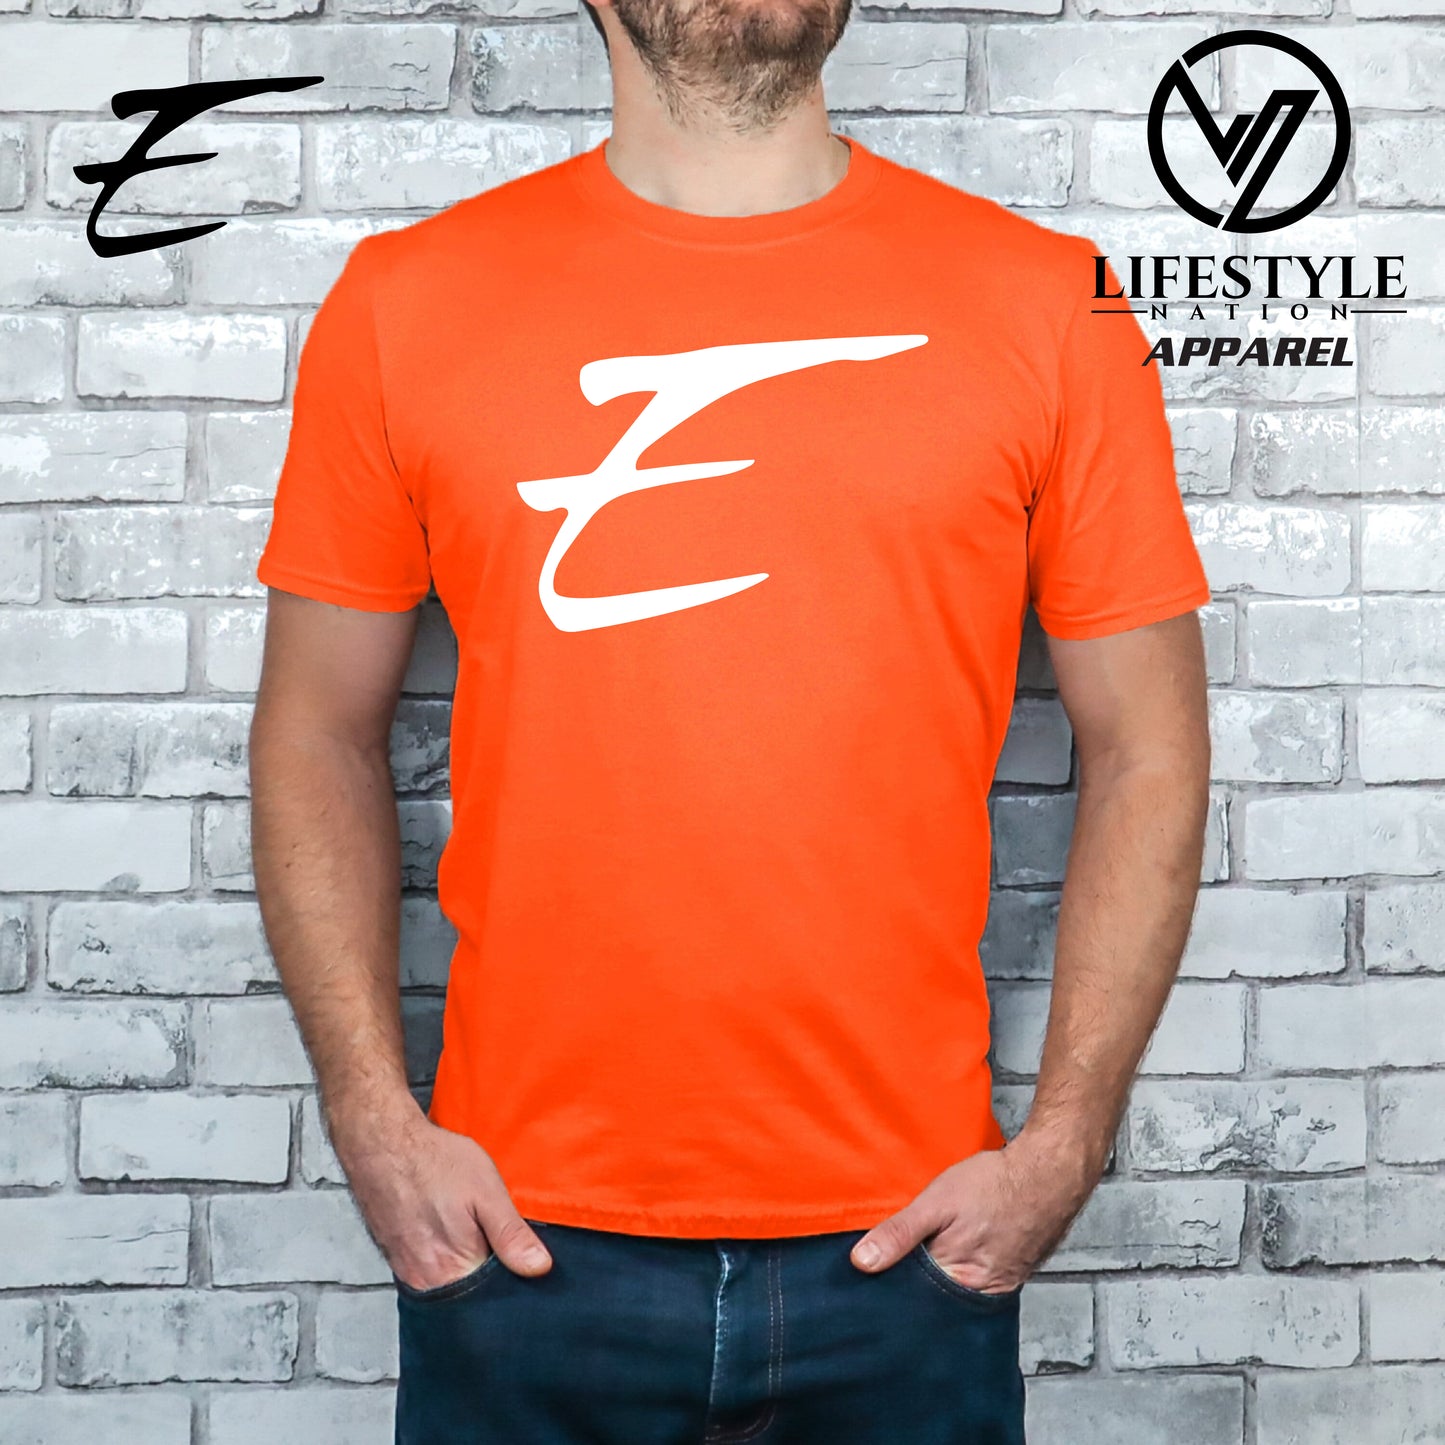 Club Eden T-Shirt Softstyle with White E - Pick Color